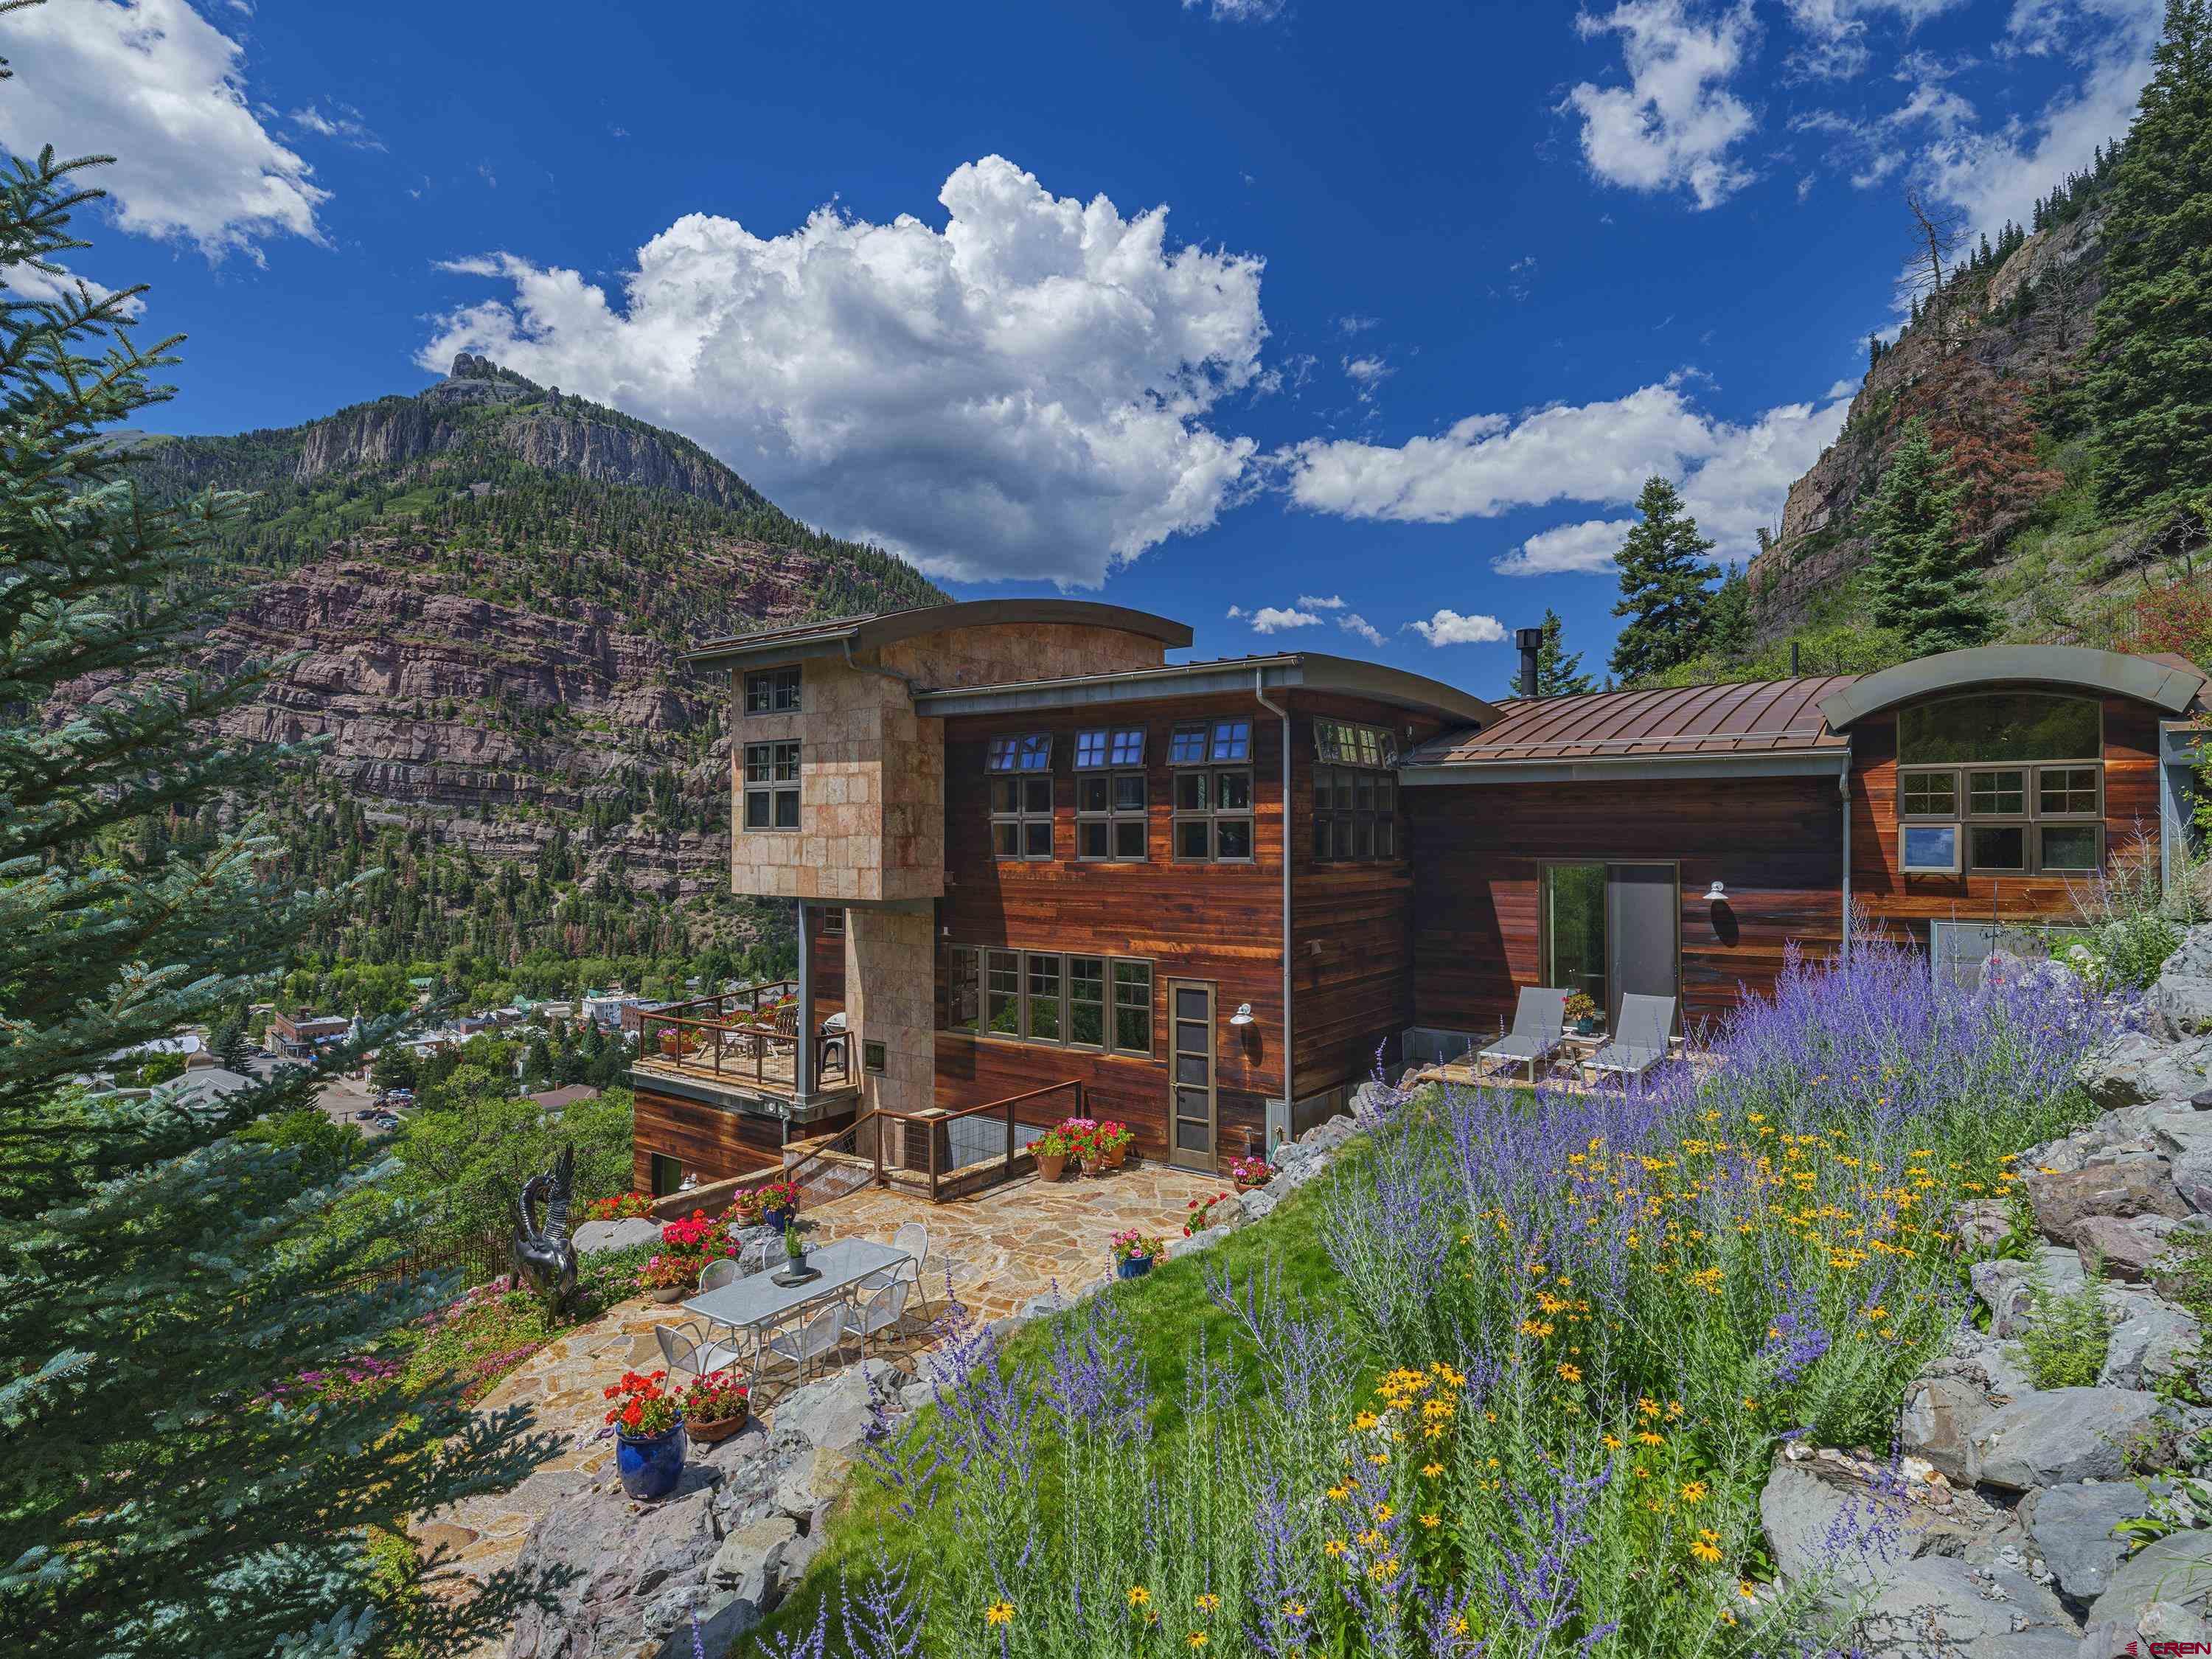 Custom designed luxury home situated on the side of the mountain overlooking Ouray. Boasting over 4,000 square feet, this remarkable, multi-level residence features thoughtful architectural details that complement the majesty of the surrounding area, while floor-to-ceiling windows capture the restorative beauty of the San Juans. Clean lines, rustic textures and natural materials set the tone of the interior spaces that rest within this Ouray Perimeter trail side property. With some of the best views in Ouray, 433 Hillcrest is one of the most desirable homes in the region. The large, open living room, with rich hardwood floors, invites one to relax by the antique Shenandoah fireplace, admire its stunning architecture and dramatic views of the surrounding vistas. A well-appointed gourmet kitchen, complete with a fantastic 6 burner AGA range and adjacent great room make entertaining simple and easy. The main bedroom wing offers amazing views, a spacious dressing room and its own private deck with custom built wood hot tub and wonderful seclusion from the main residence.  Additional amenities include hi-speed fiber optic cable, a Bluetooth enabled sound system installed throughout home and wireless app control of all landscape irrigation, spa hot tub functions and monitored alarm system.  All outdoor decks and driveway pad have induction heat. Created and drawing deeply from the history of Ouray, reflected in the way the home is designed on its spectacular lot, with pick-ax cross windows, a mine shaft feel to the central tower and finally, the gentle curves of the roof creating a serene contrast to the peaks. The architectural curves exude a quiet strength with their natural flow and showcase the idyllic mountain setting and expansive outdoor living spaces.